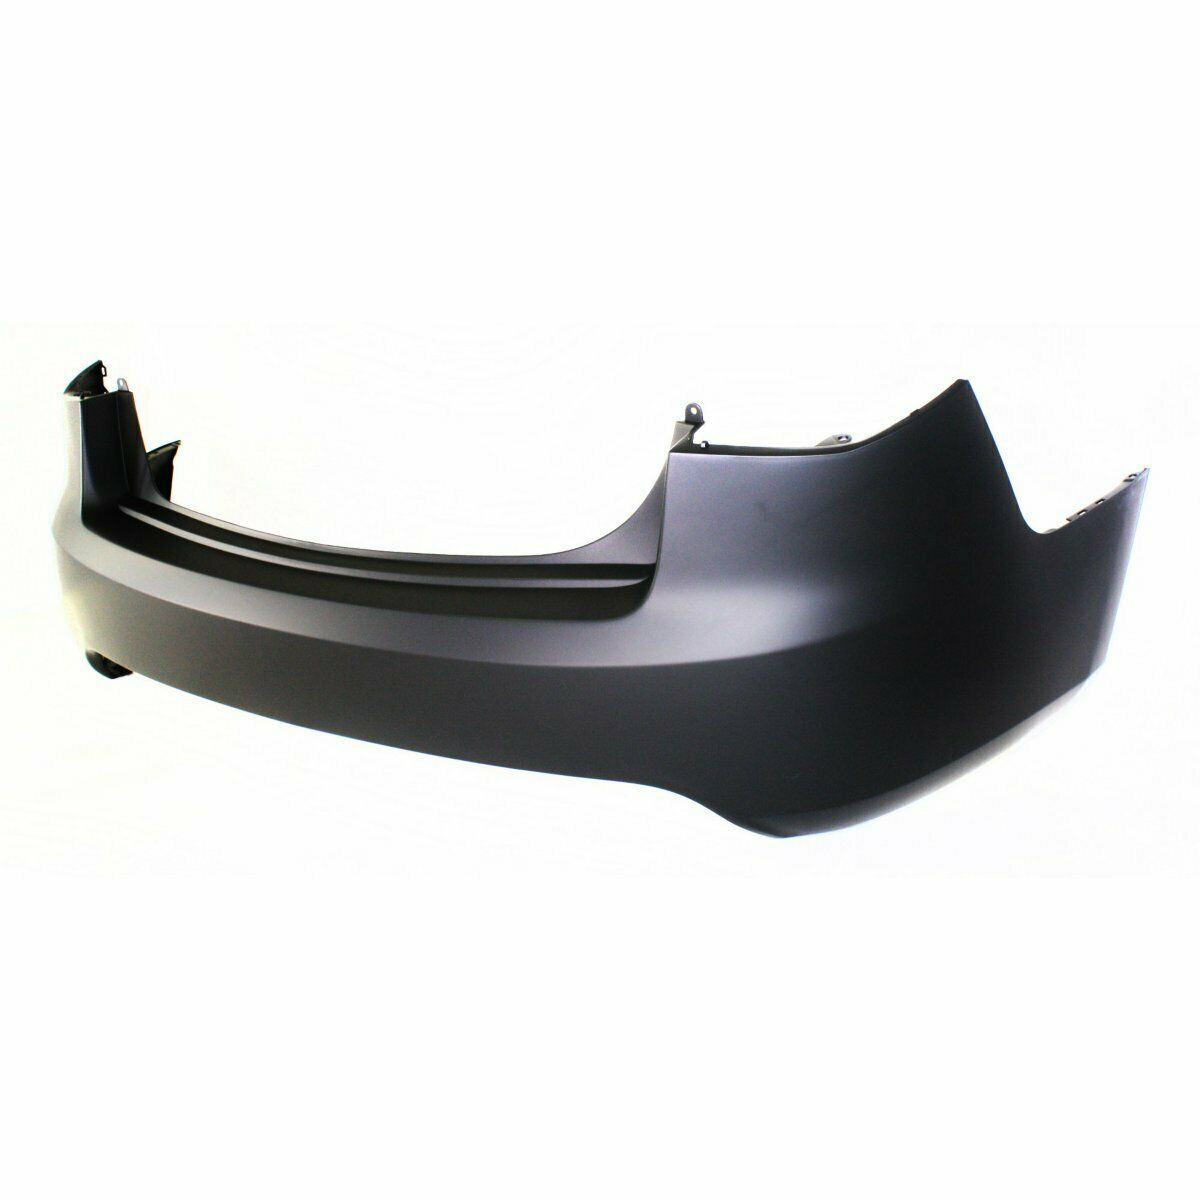 2010-2013 Kia Forte Rear Bumper Painted to Match